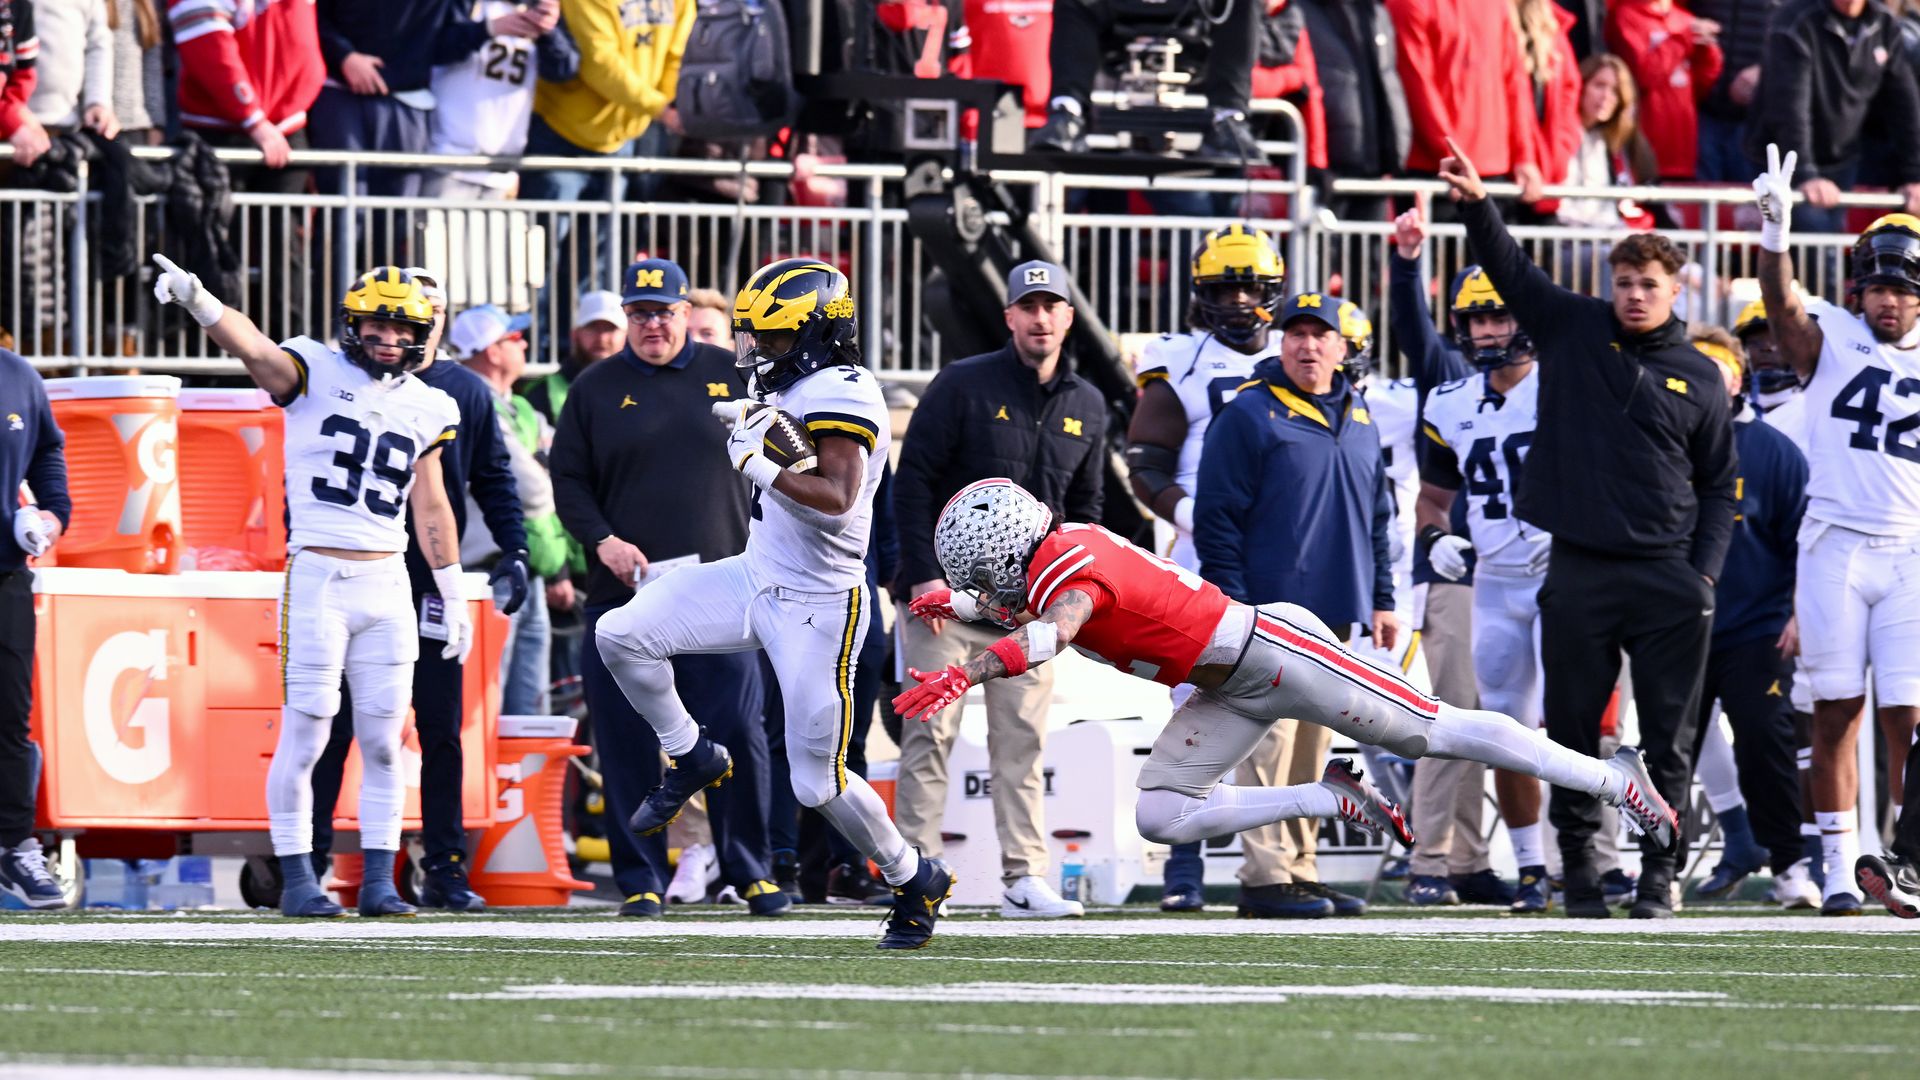 A Michigan football player evades an Ohio State tackle. 